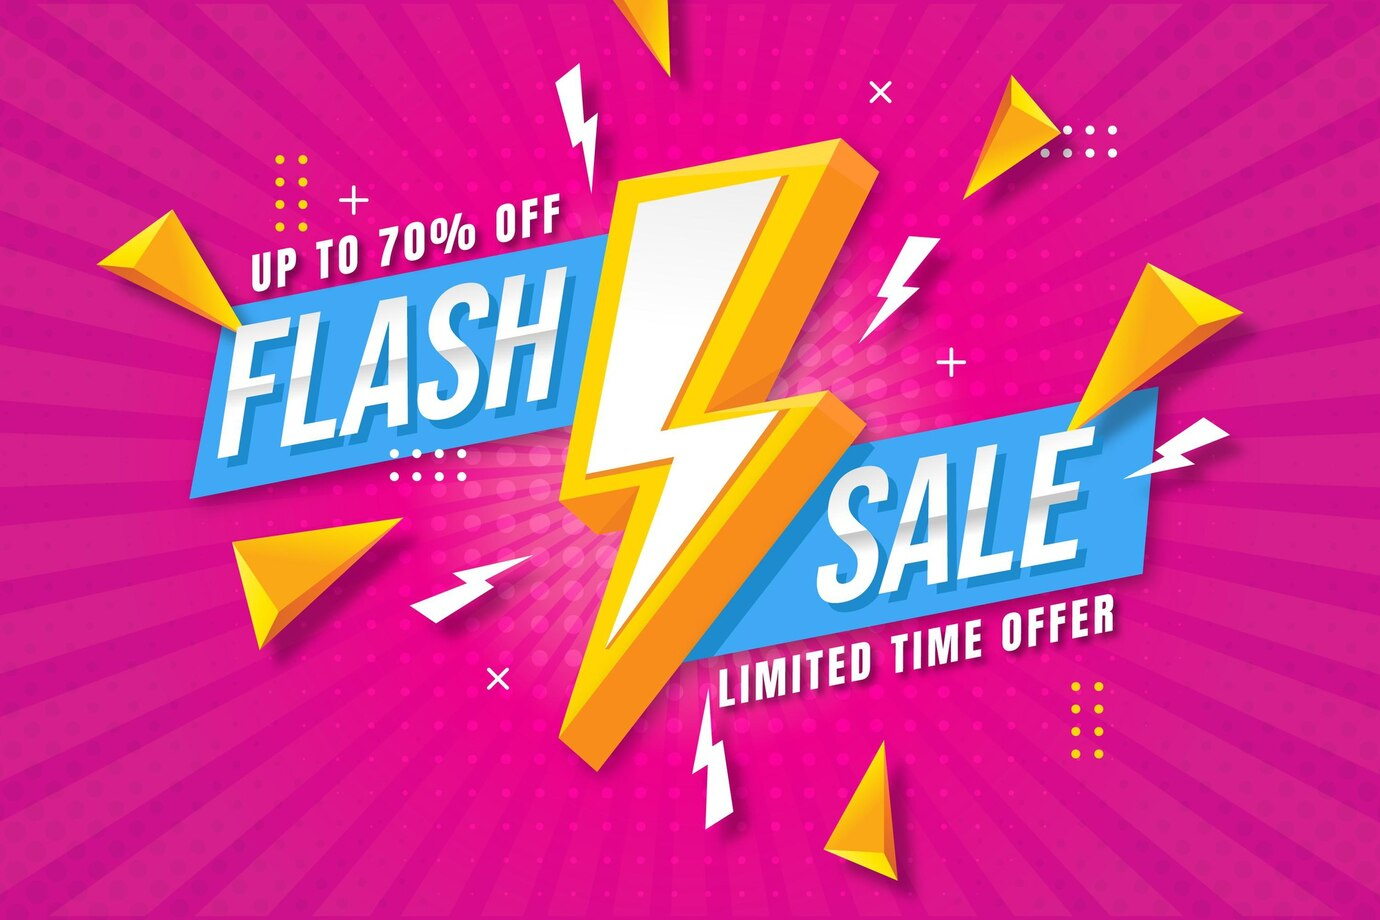  Optimising ad visibility during flash sale using Google Ads 